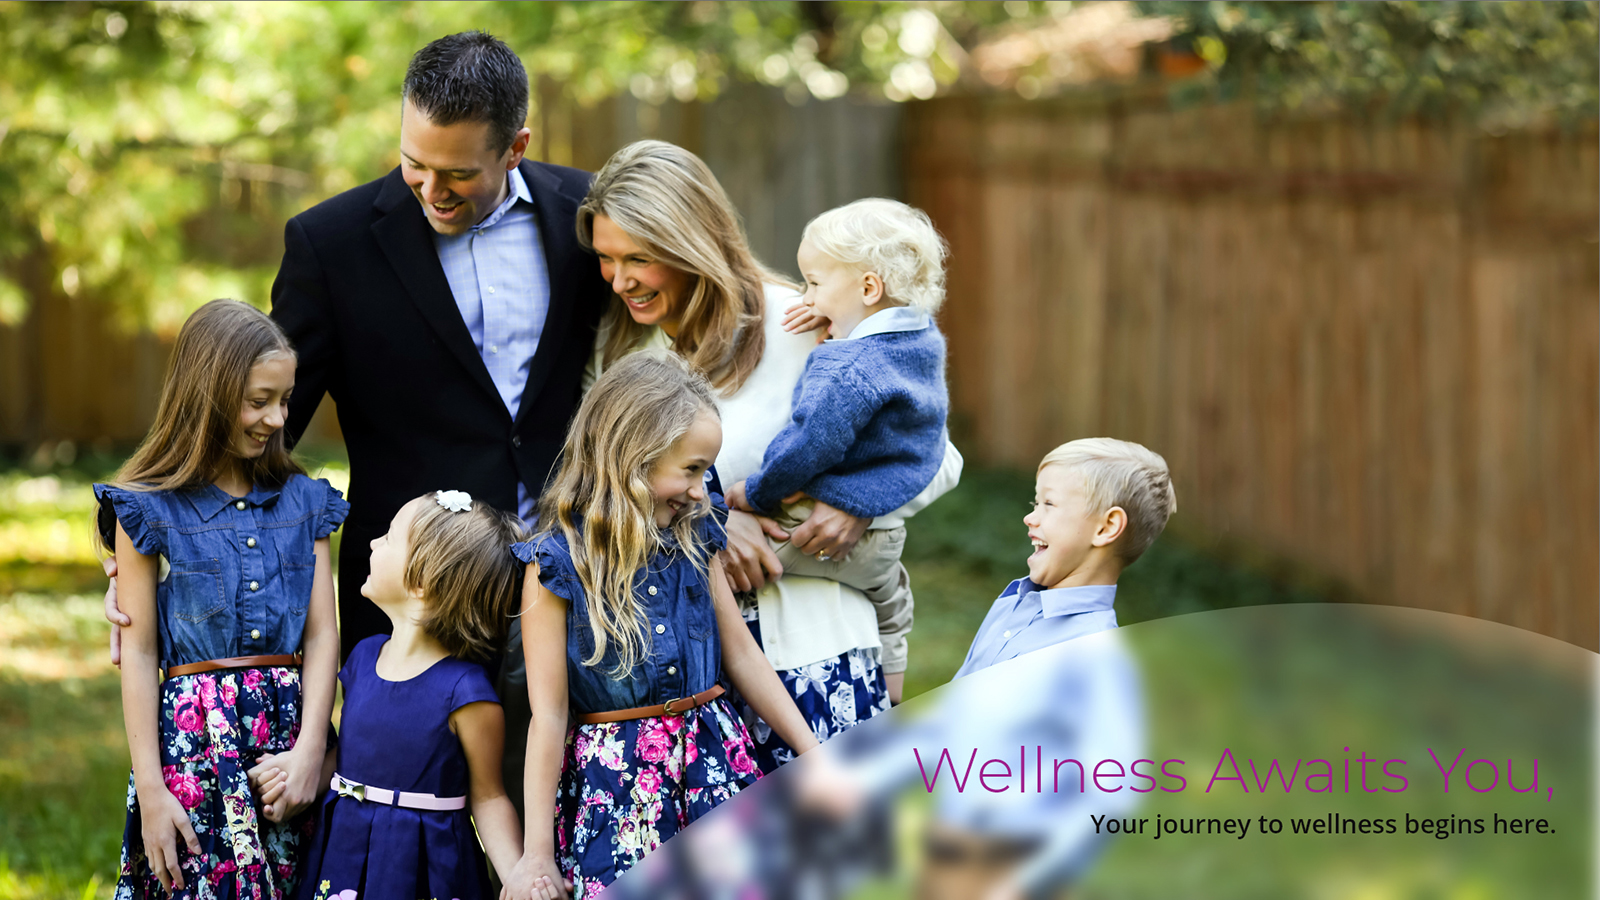 Banner for Newhouse Health Solutions featuring Dr. Patrick Newhouse, B.S, D.C. with his family in a spacious backyard area. The text on the bottom of the image reads 'Wellness Awaits You. Your journey to wellness begins here.'